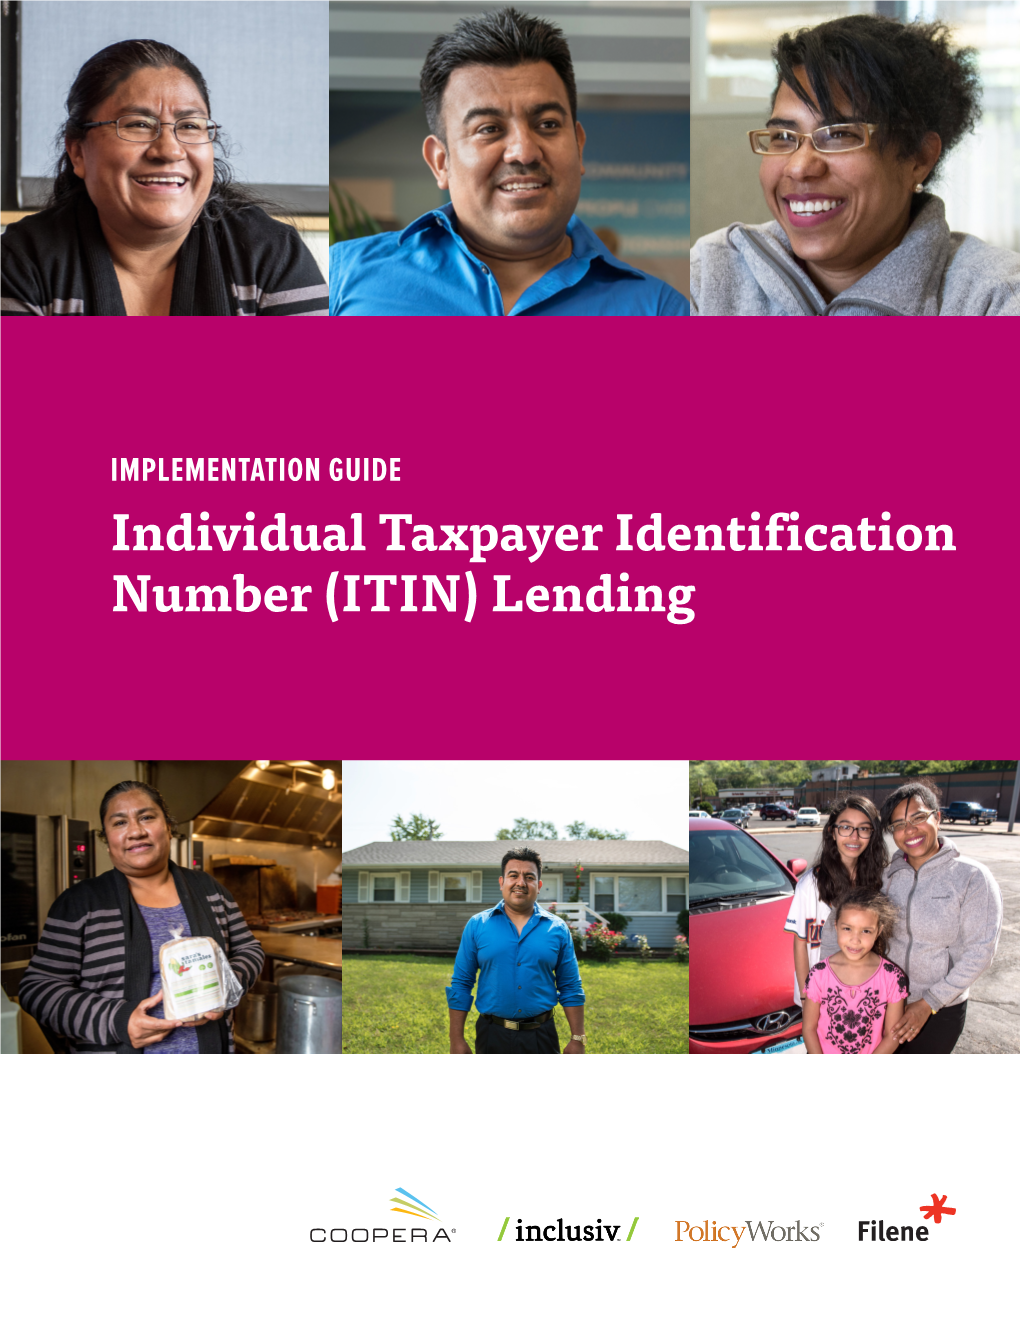 (ITIN) Lending Table of Contents